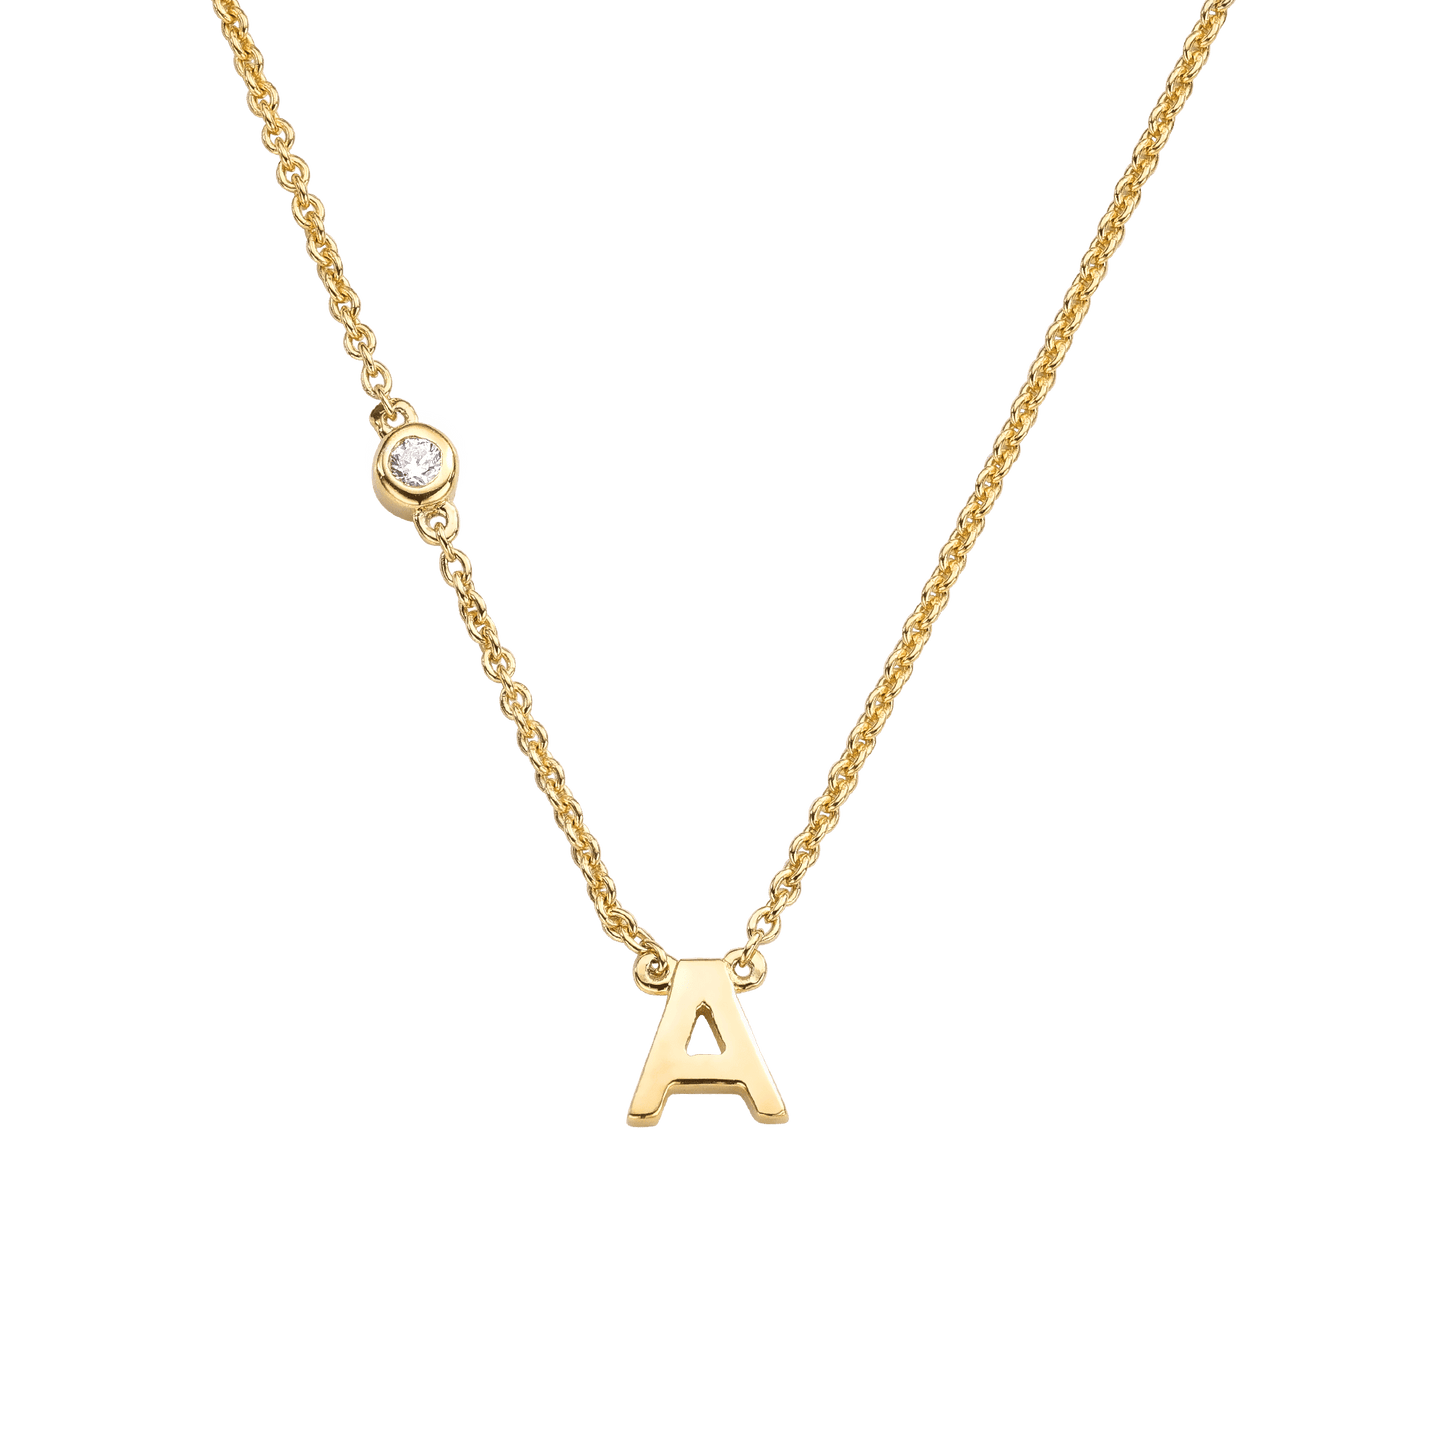 Initial Necklace with Diamonds - 18K Gold Vermeil Necklaces magal-dev 